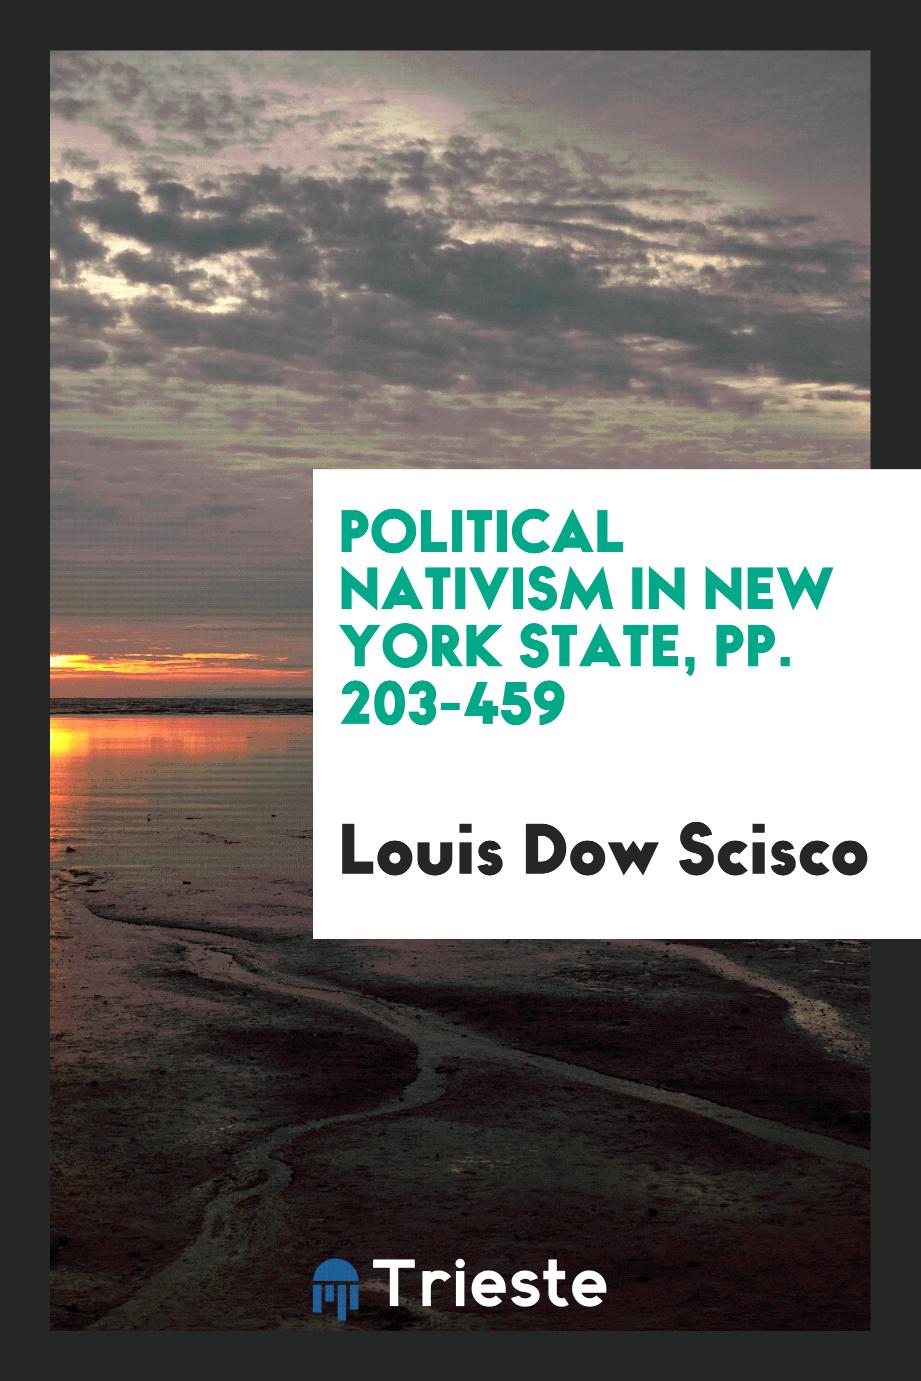 Louis Dow Scisco - Political nativism in New York State, pp. 203-459